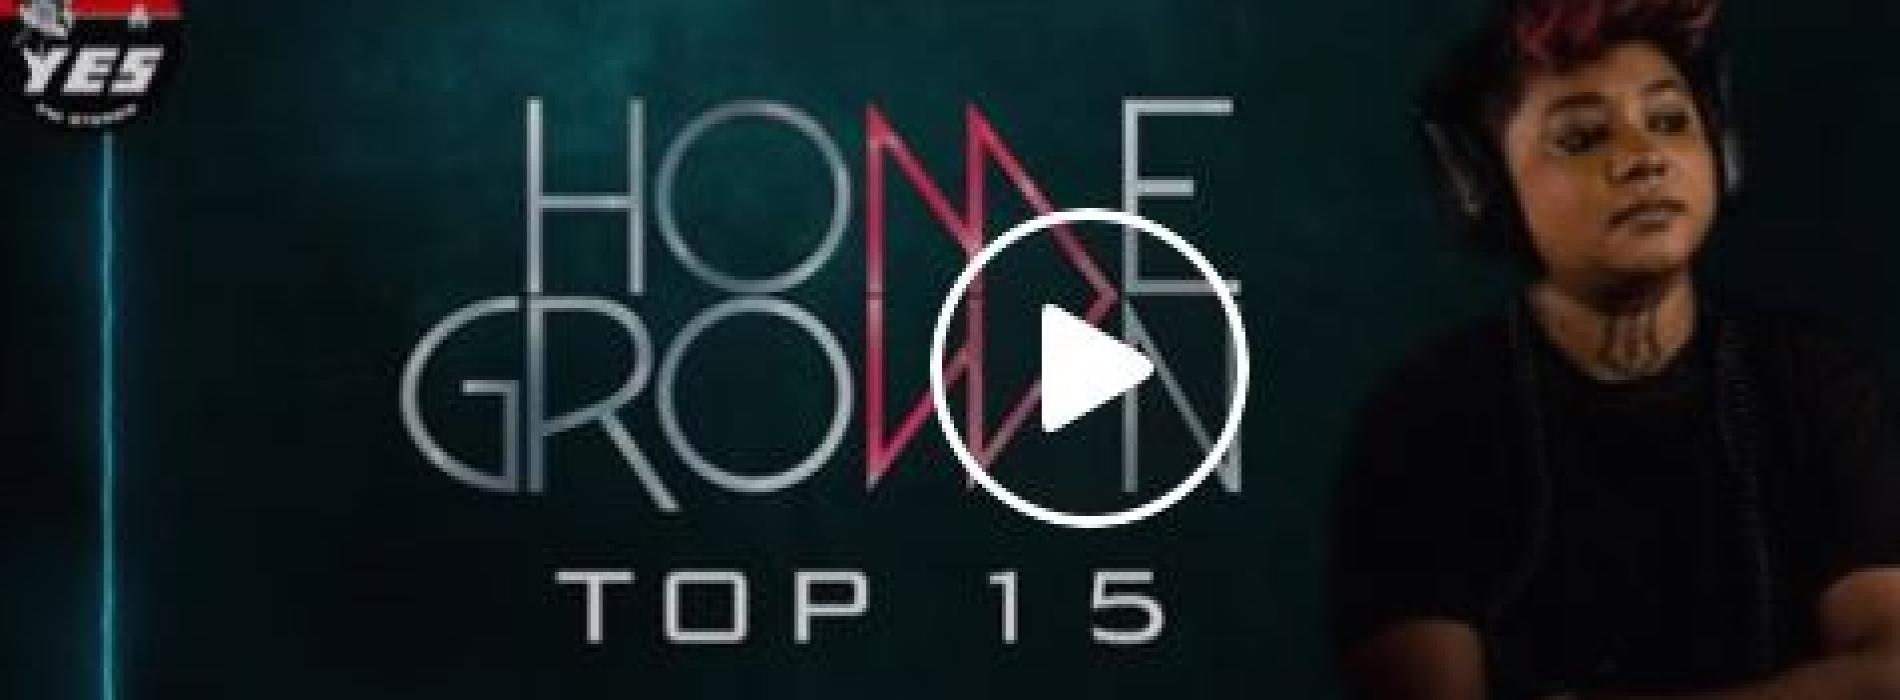 News : YES Home Grown Top 15 Celebrates Year 8!